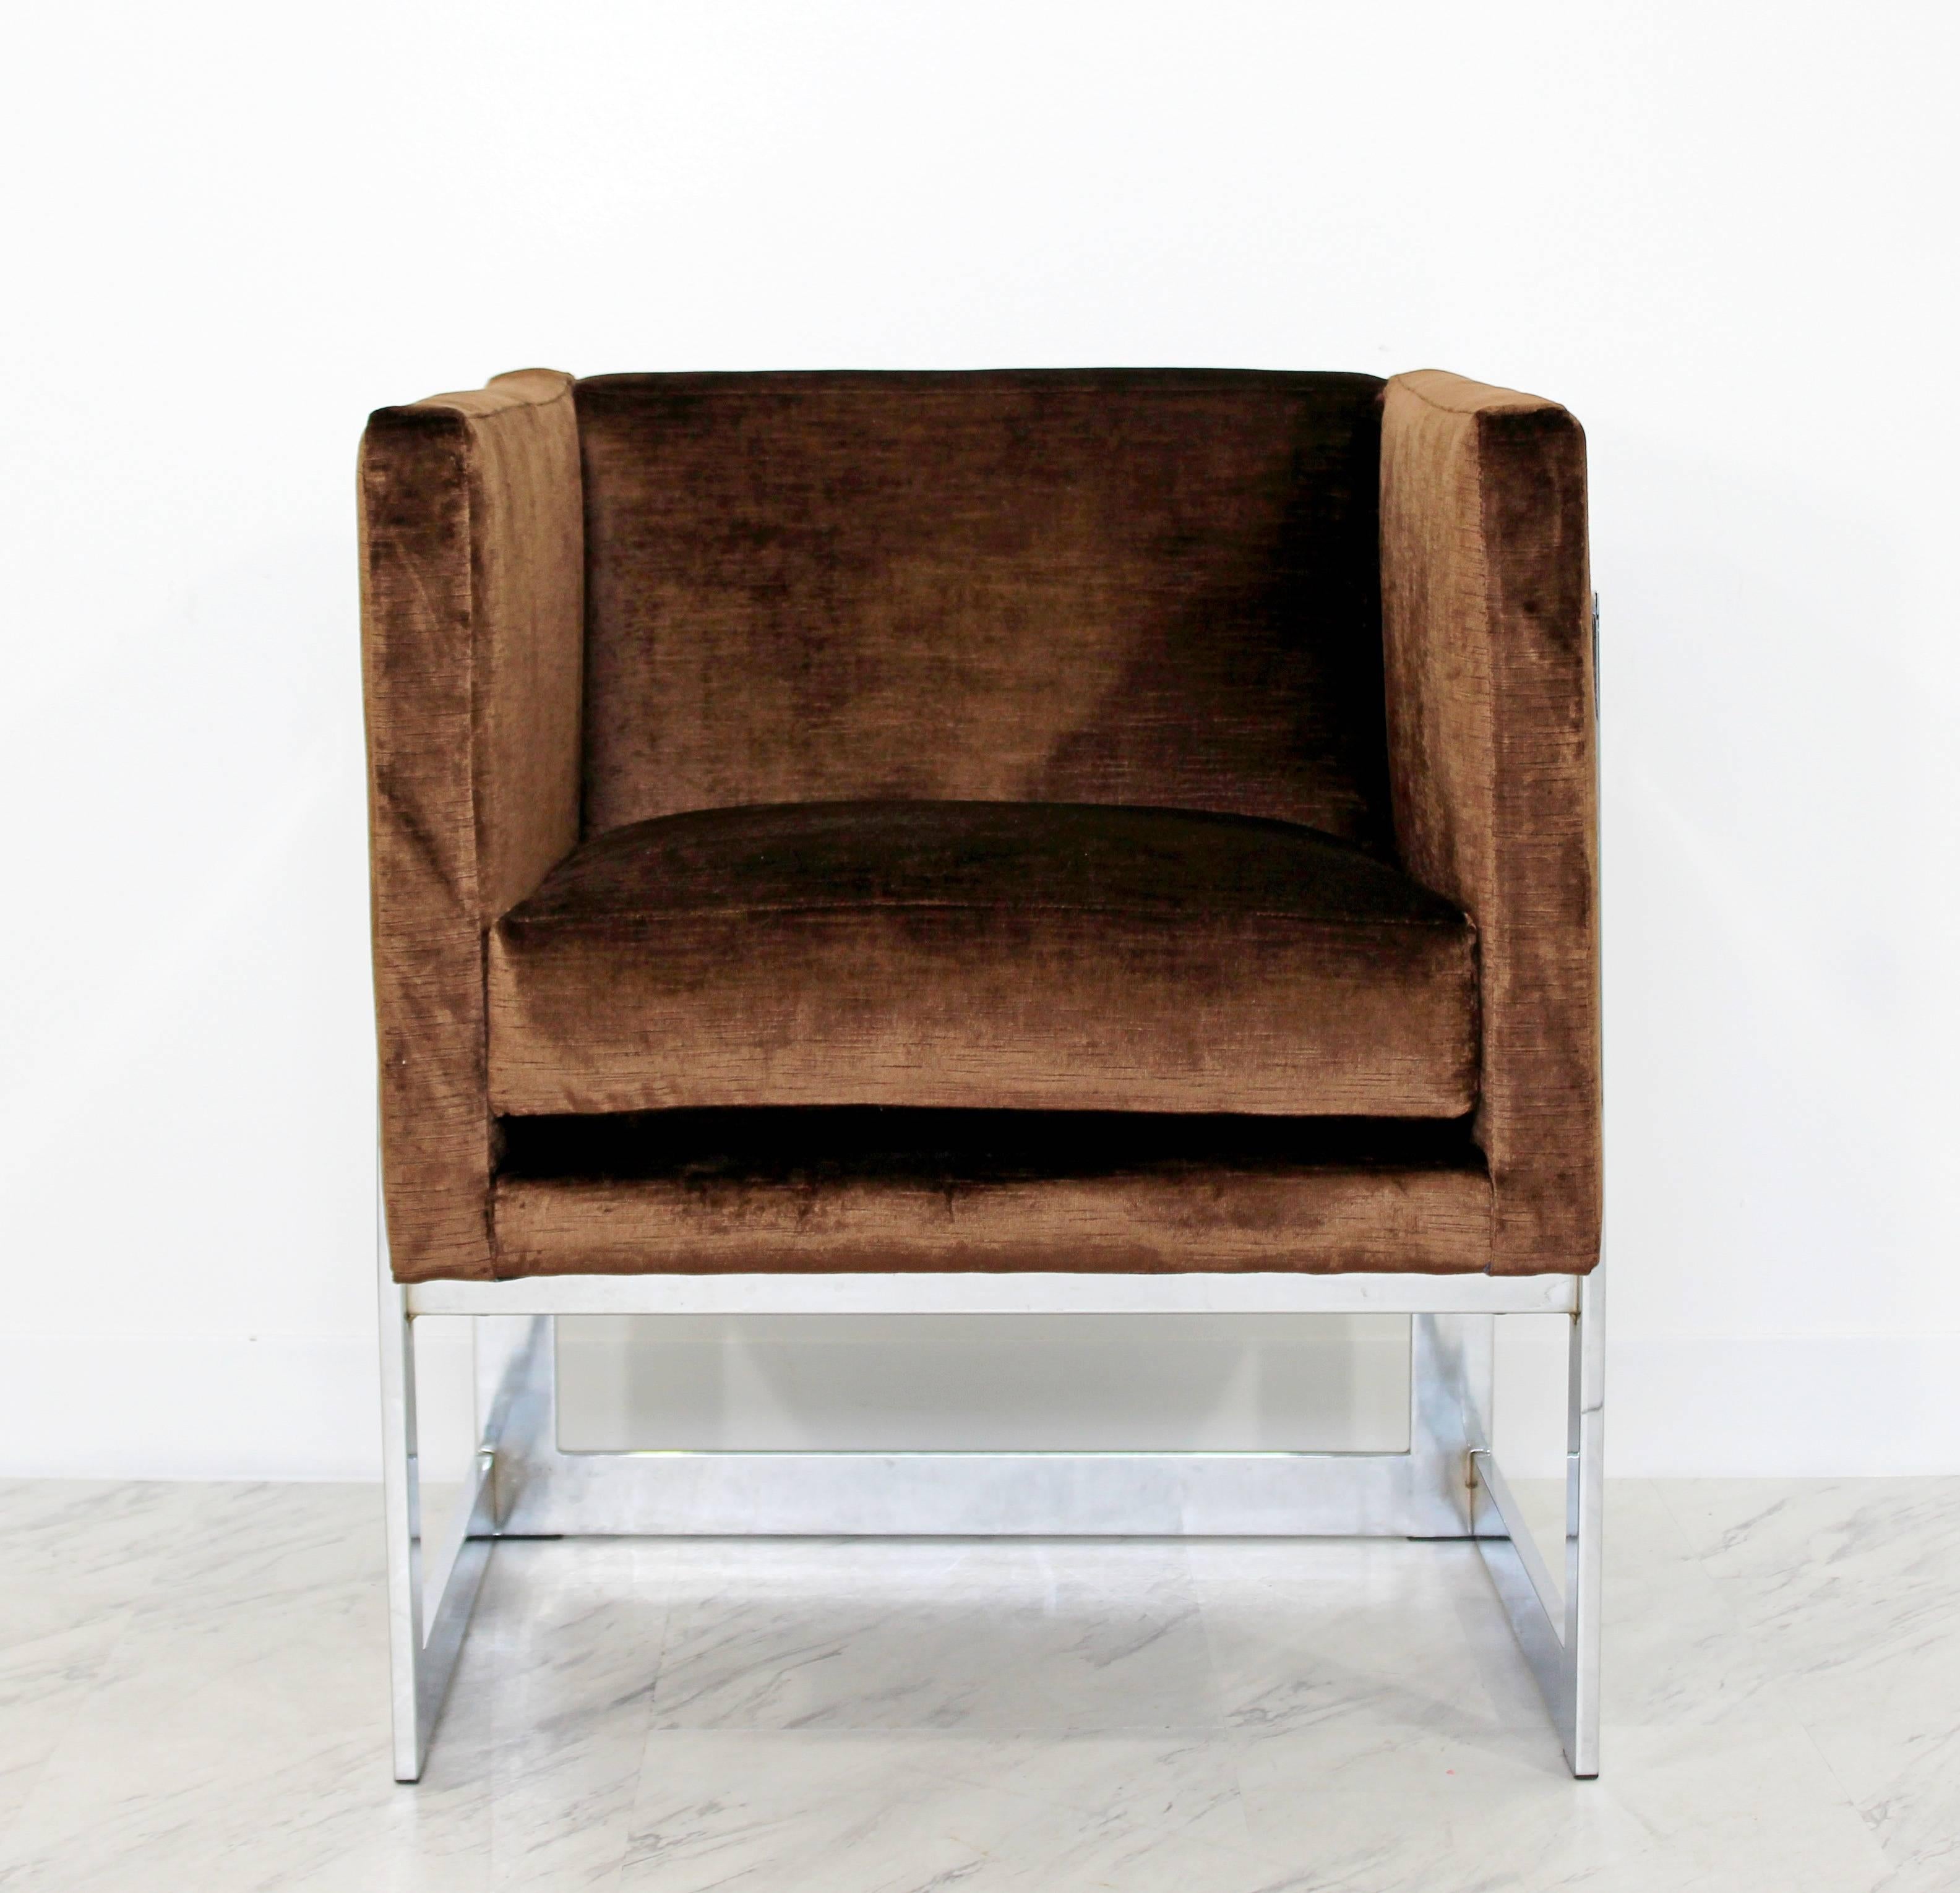 For your consideration is a gorgeous freshly reupholstered brown velvet chrome based cube chair, by Milo Baughman circa the 1970s. In excellent condition. The dimensions are 22.5